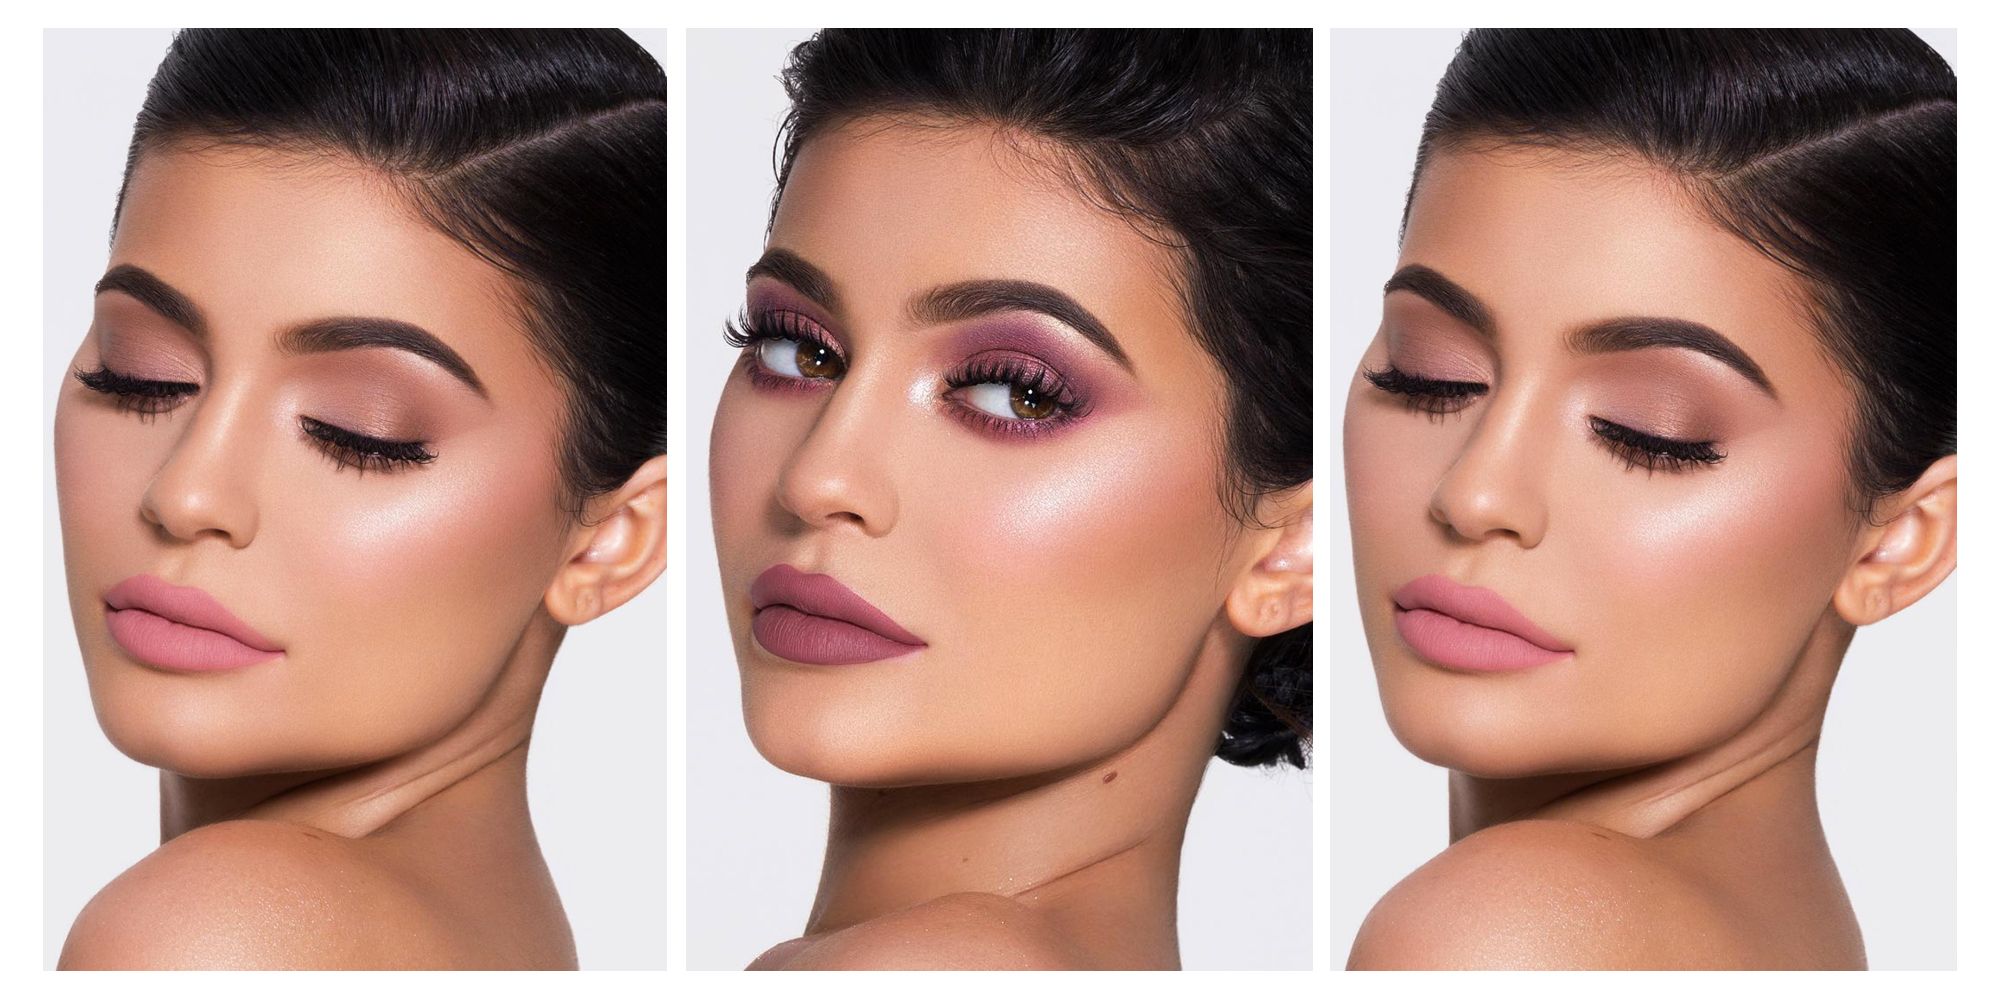 Kylie Cosmetics Makes 4 Million In 18 Months Kylie Jenner On Kylie Cosmetics Growth To Wwd